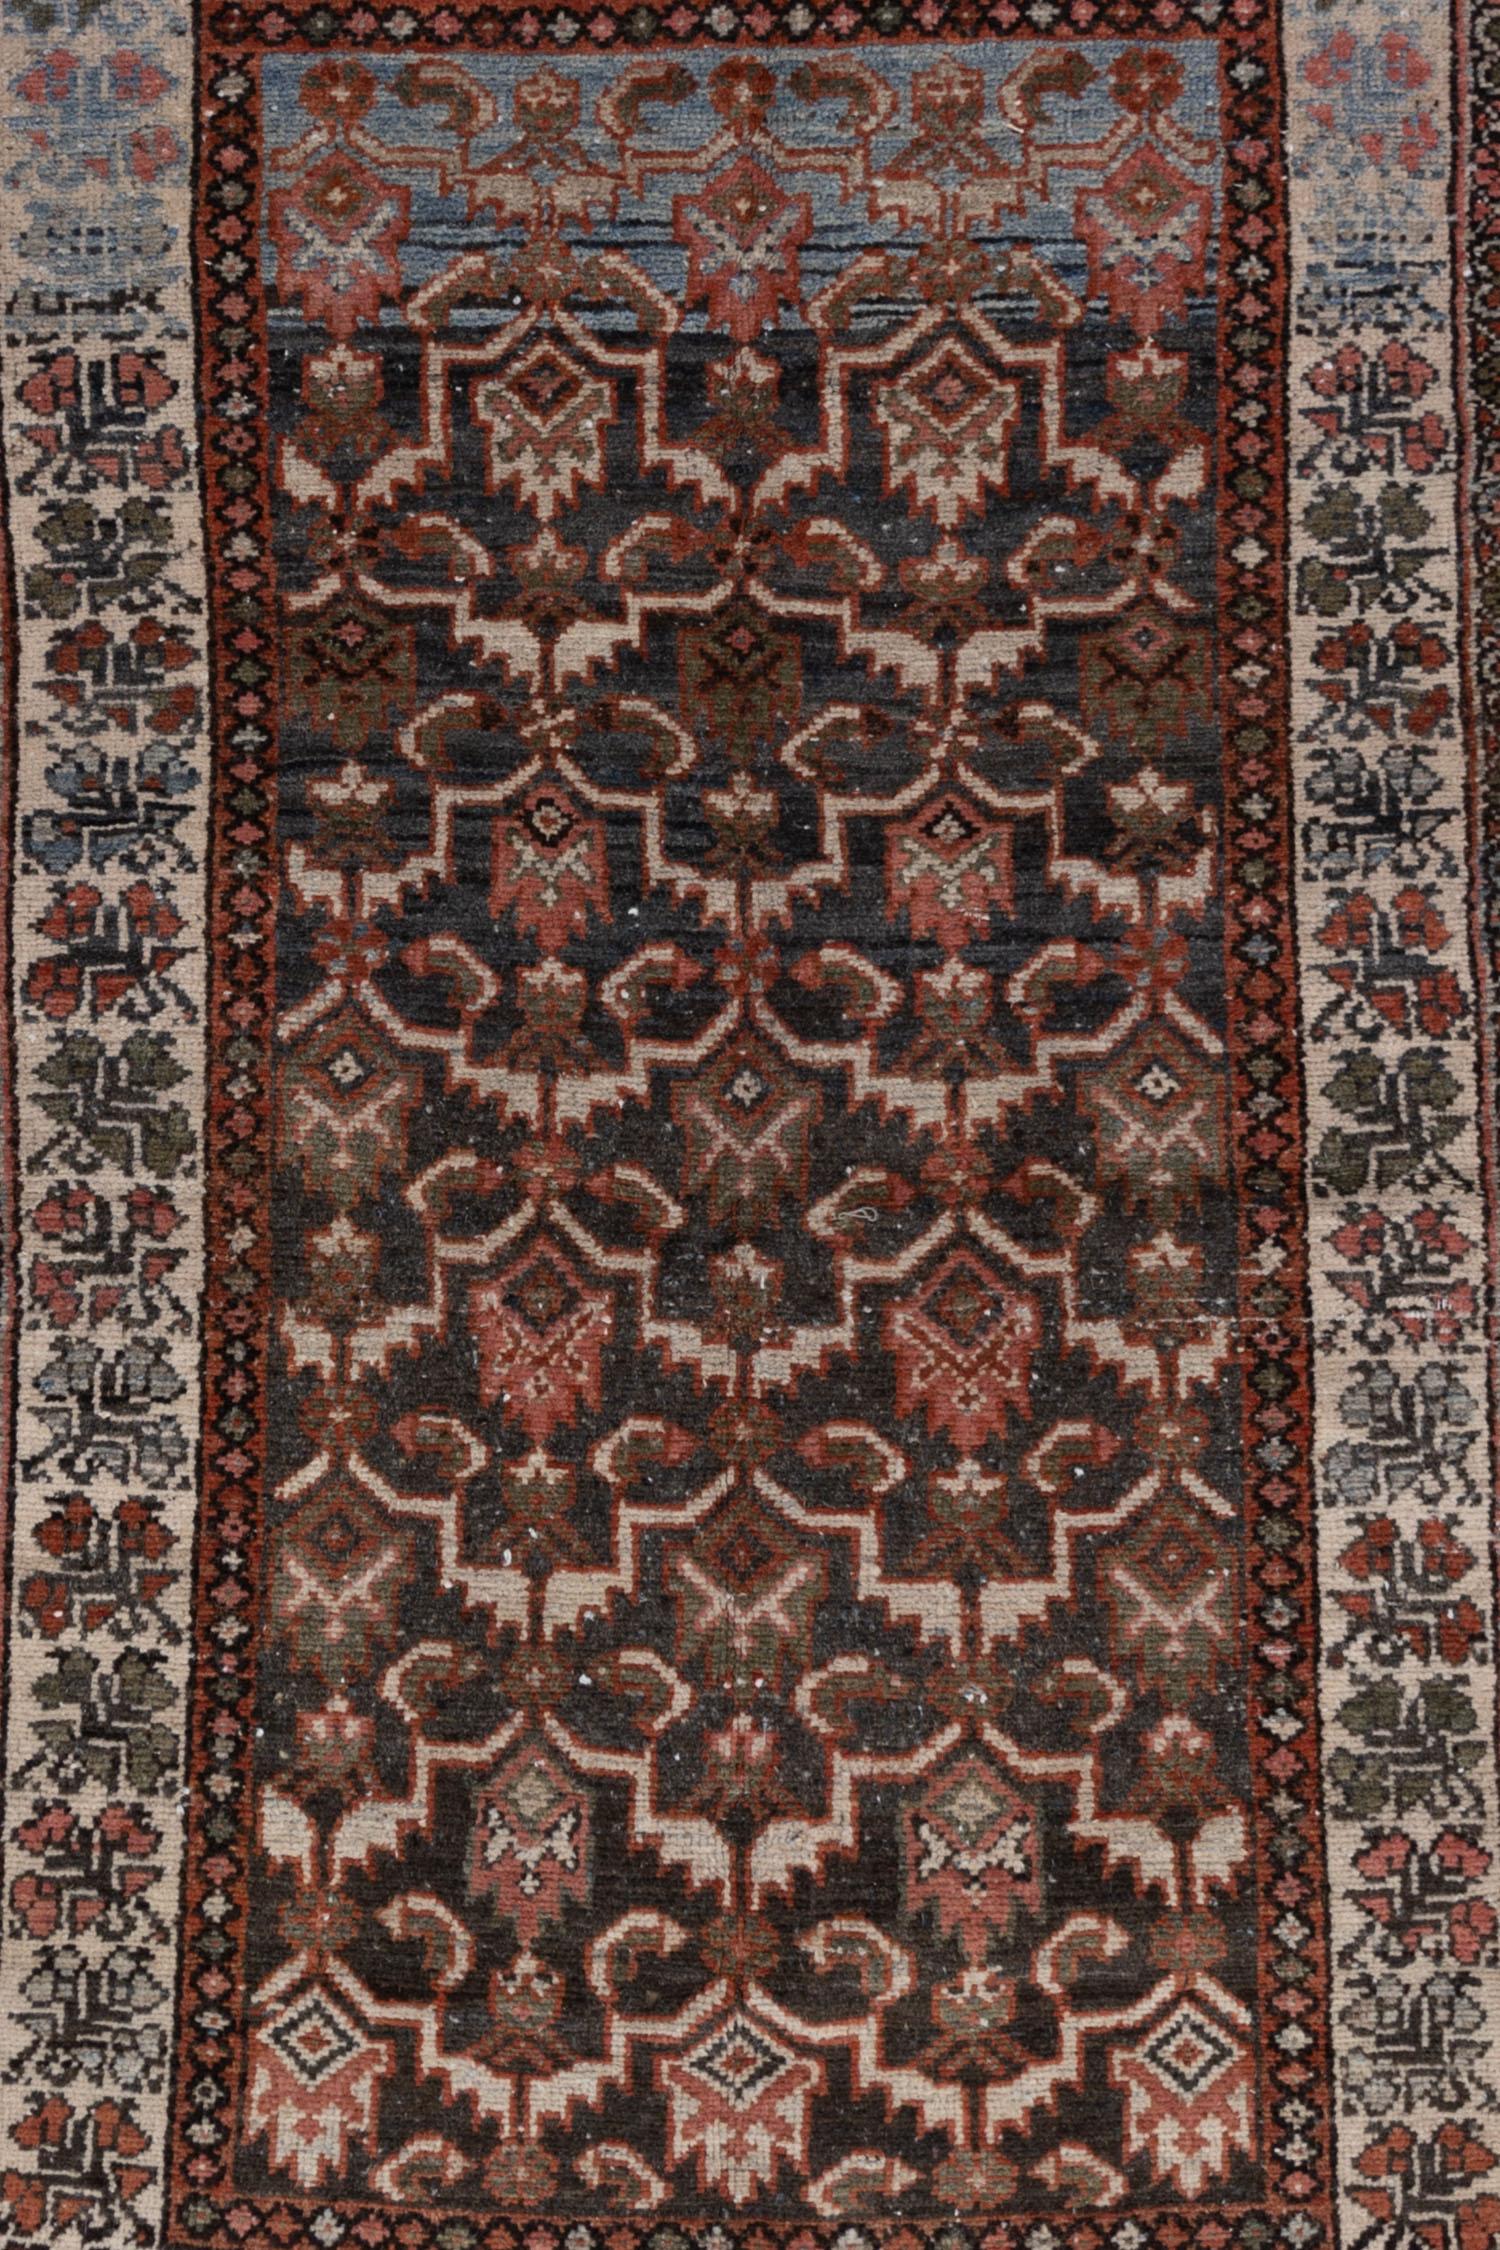 Lovely deep toned Persian scatter rug with a masculine colorway and strong motif. Please note that the photos depict the edges in a pre-repair condition. The borders will be secured and repaired before shipping. 